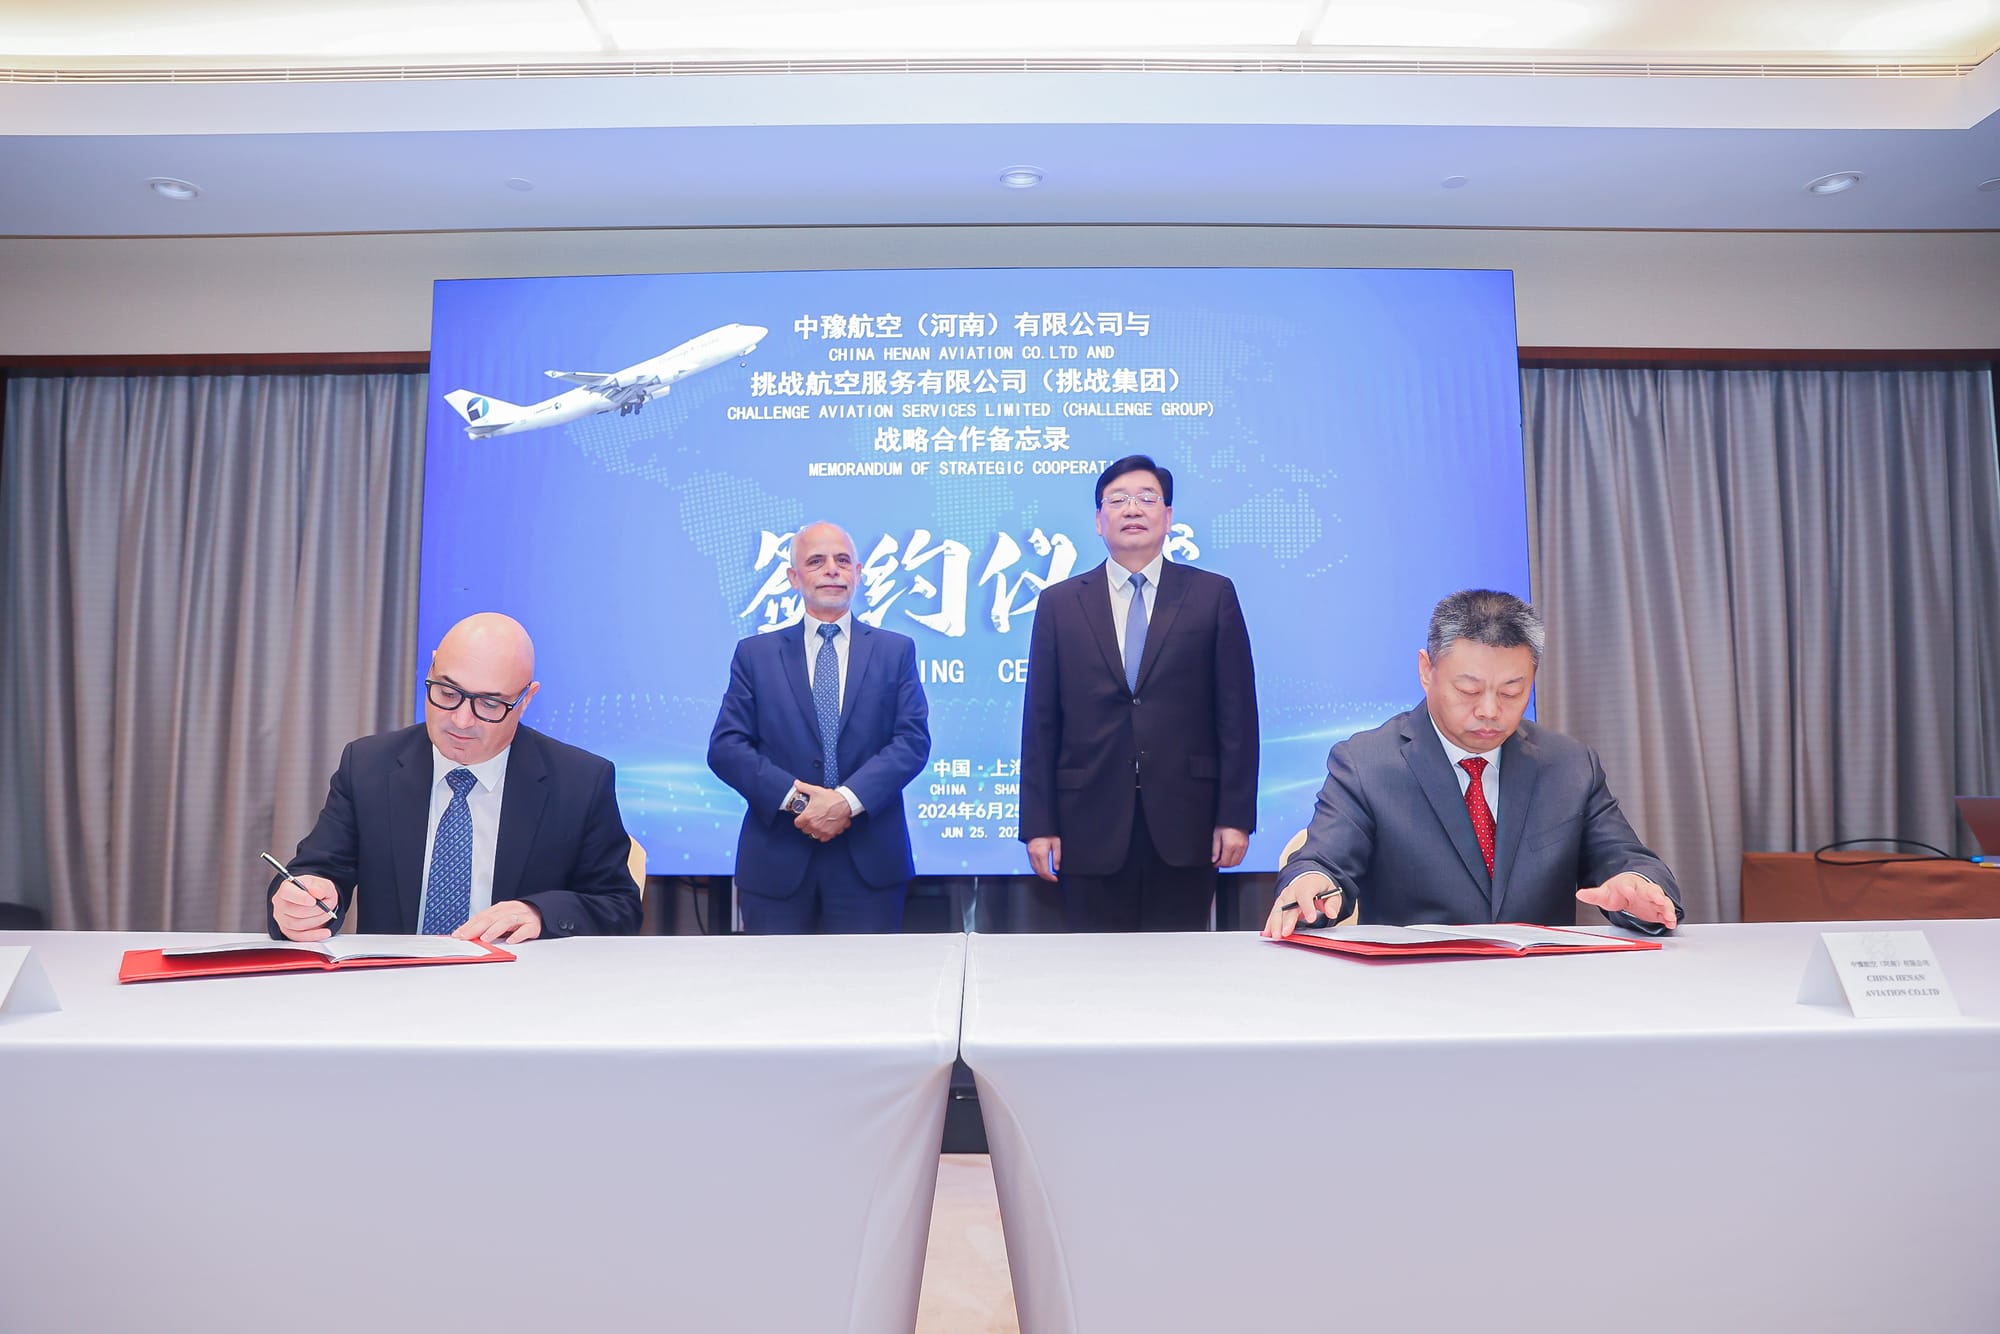 Challenge Group Signs MOU with China Henan Aviation Co., Ltd. at Air Cargo China